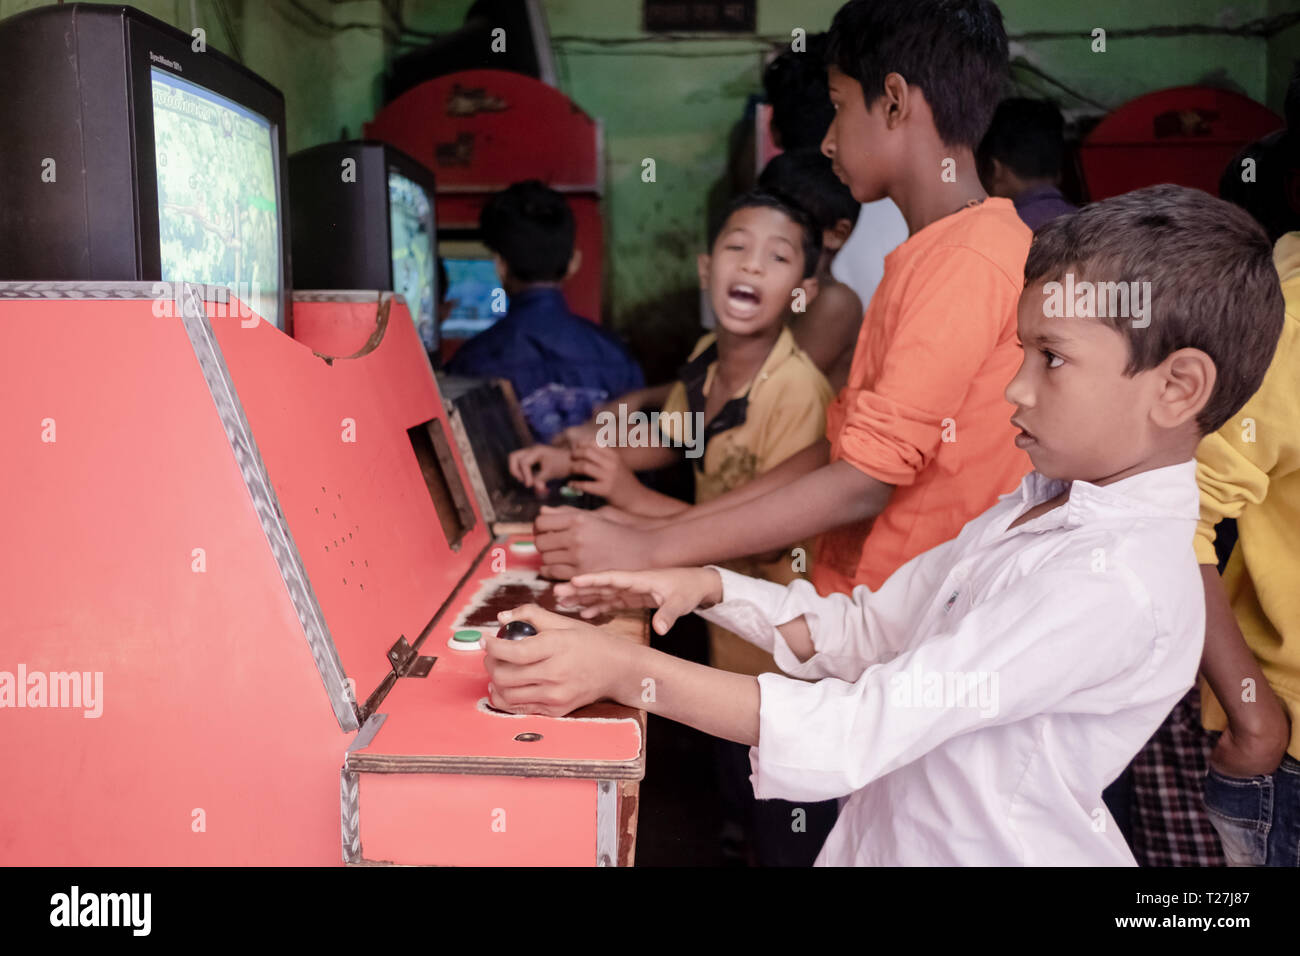 Boys play old style arcade video games in Geneva Camp, stranded Pakistanis enclave in Dhaka, Bangladesh. Stock Photo